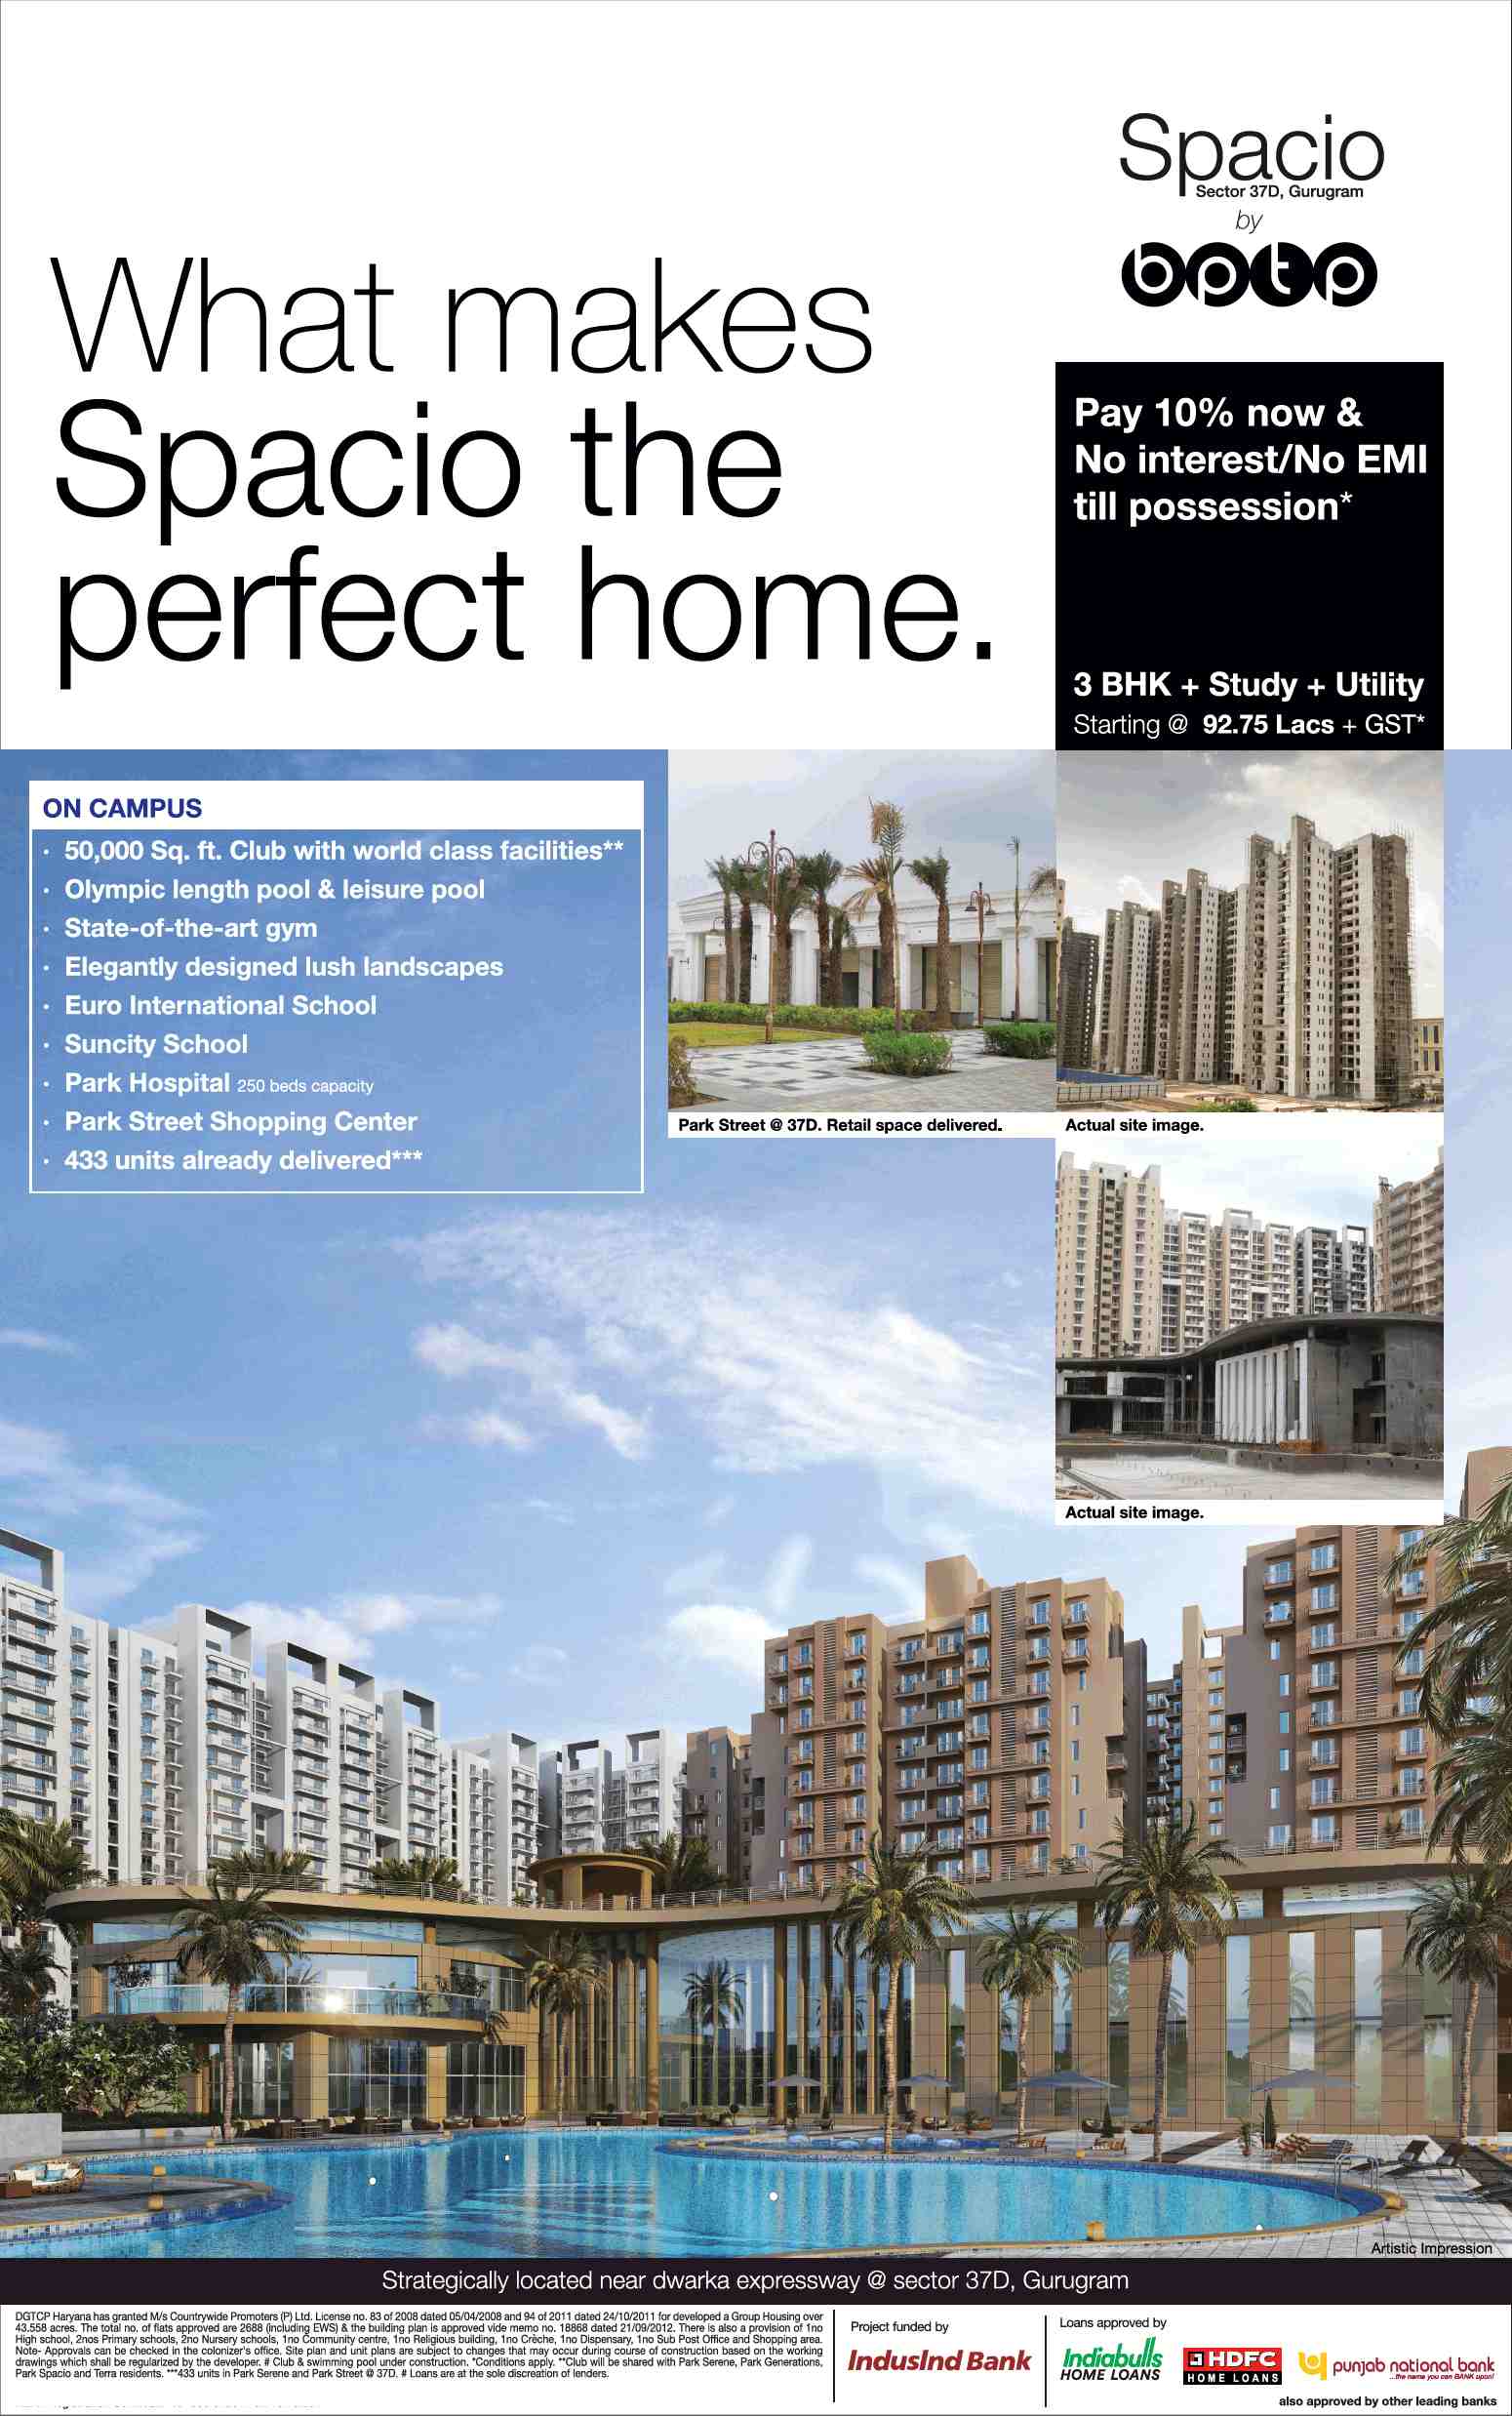 Pay 10% now and no interest & EMI till possession at BPTP Spacio in Gurgaon